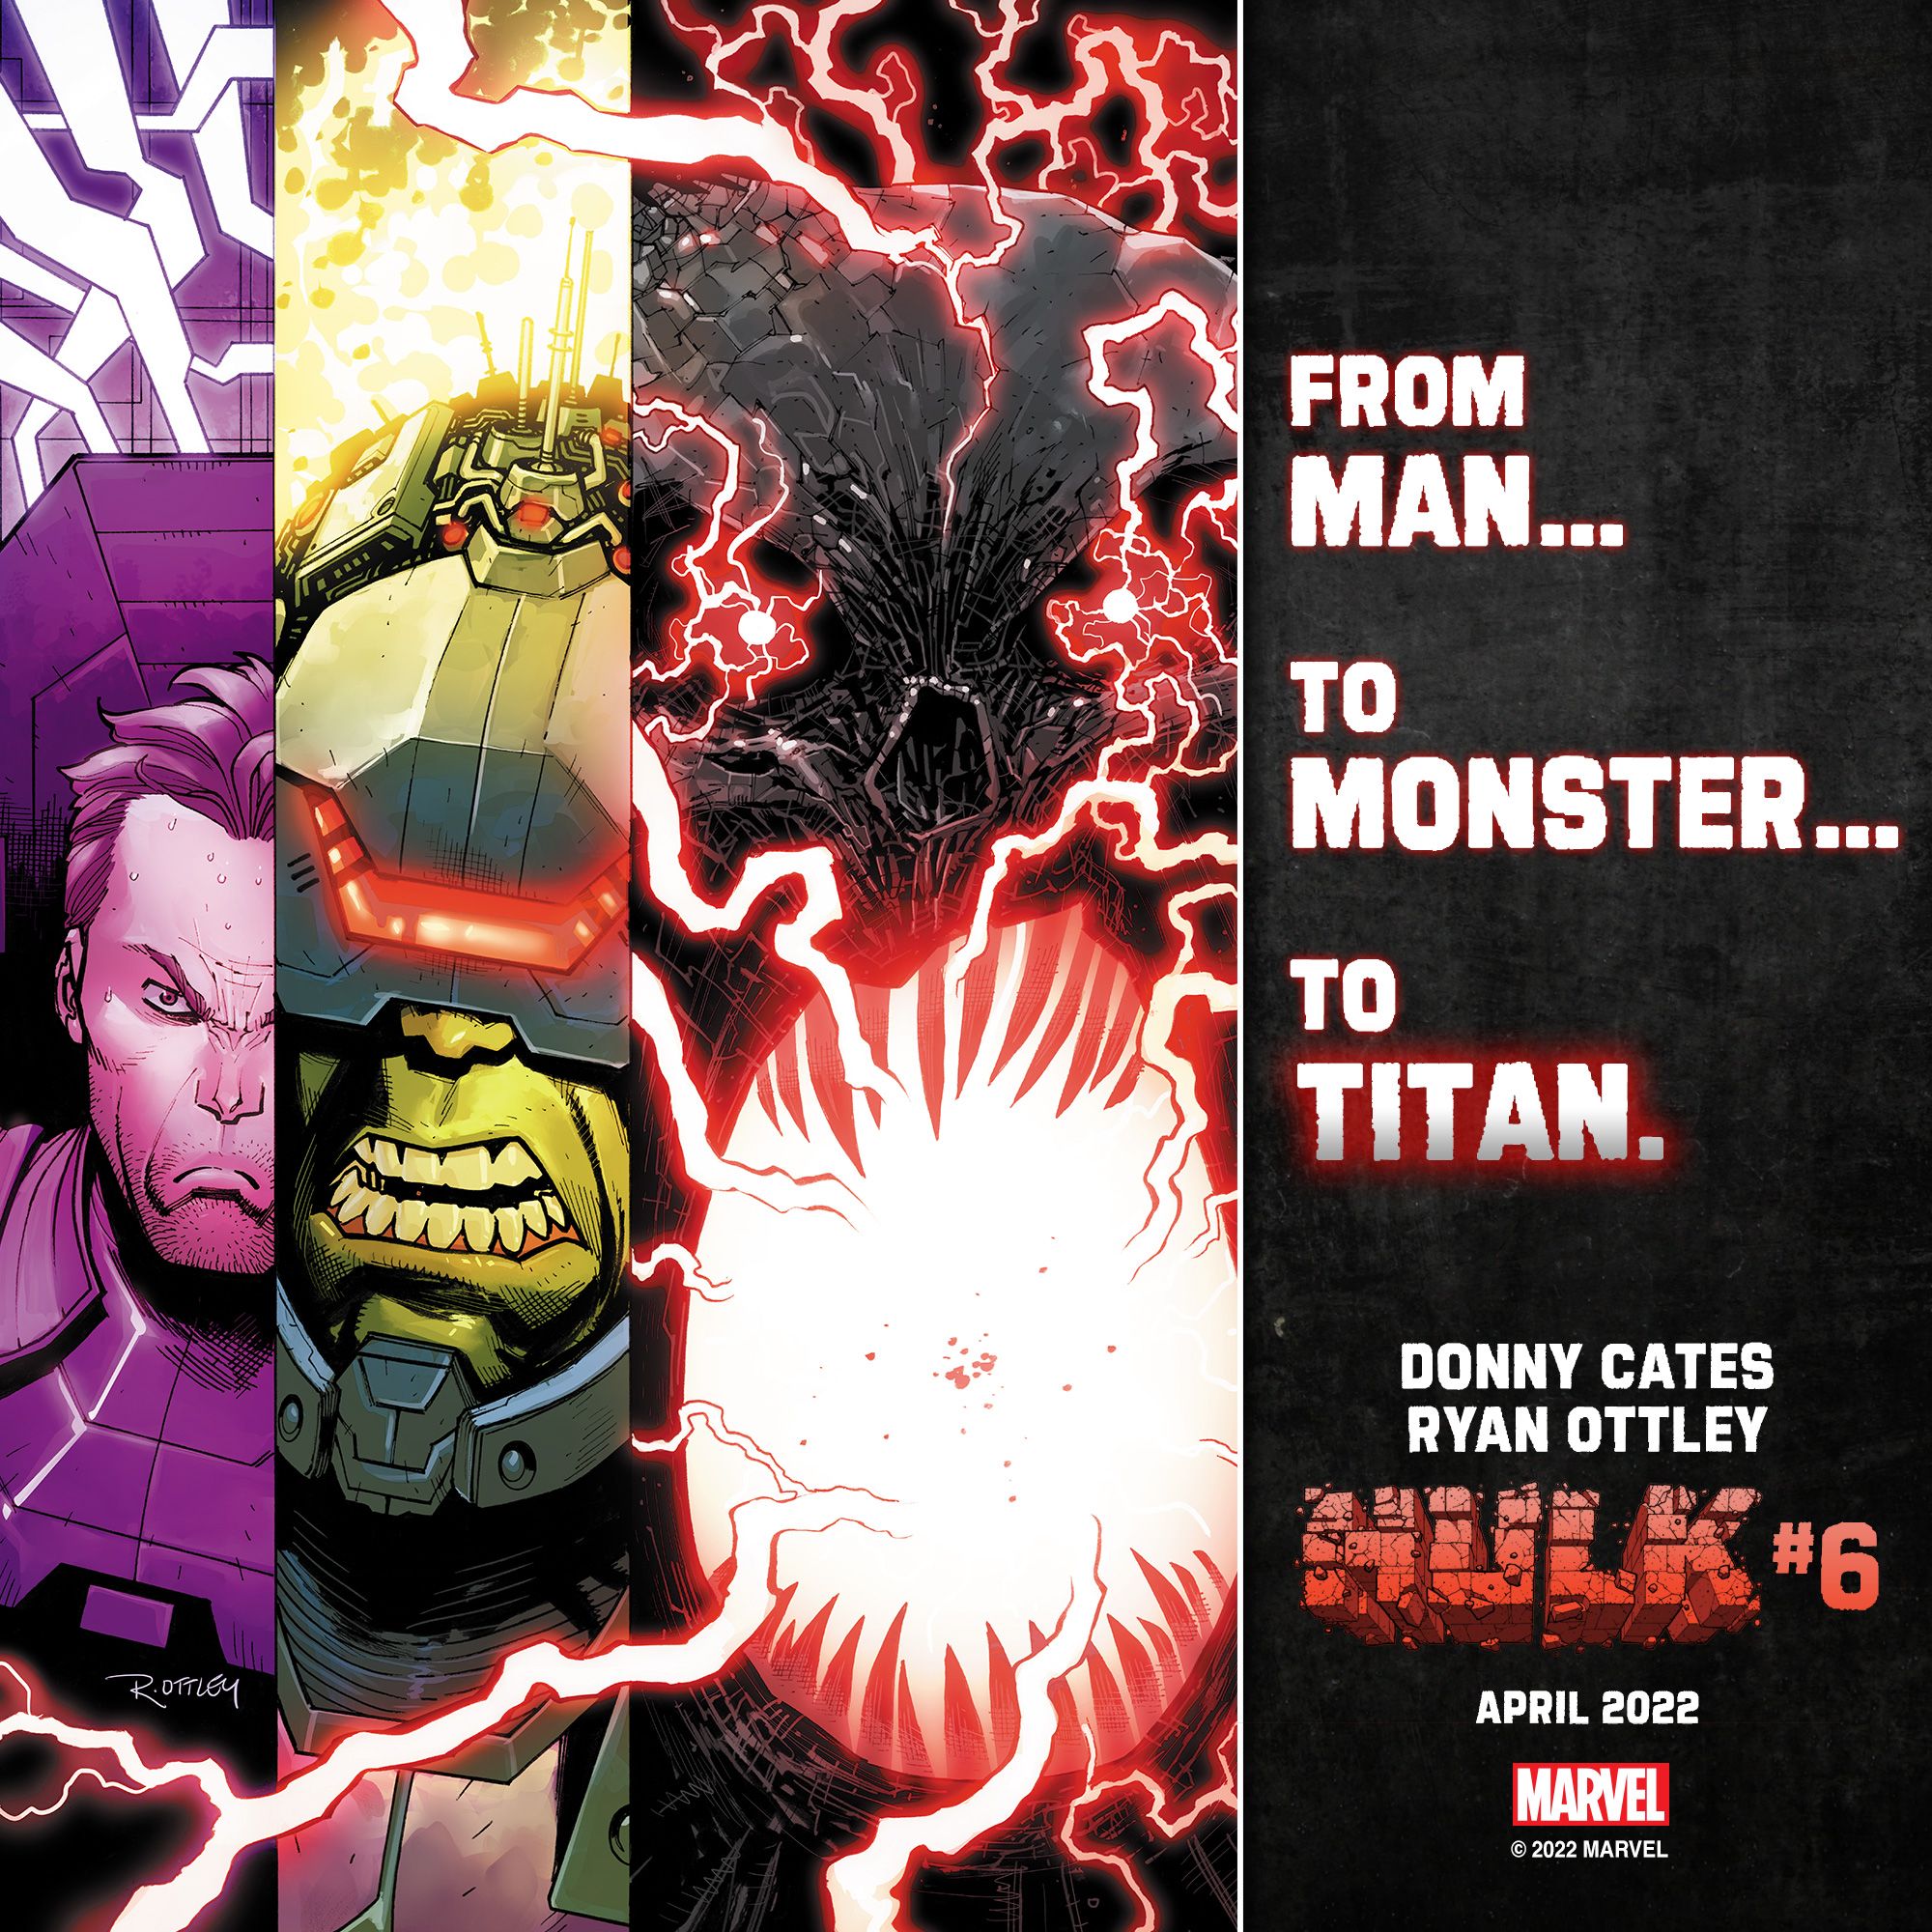 Cover for Hulk #6, by Donny Cates and Ryan Ottley, showing Titan.